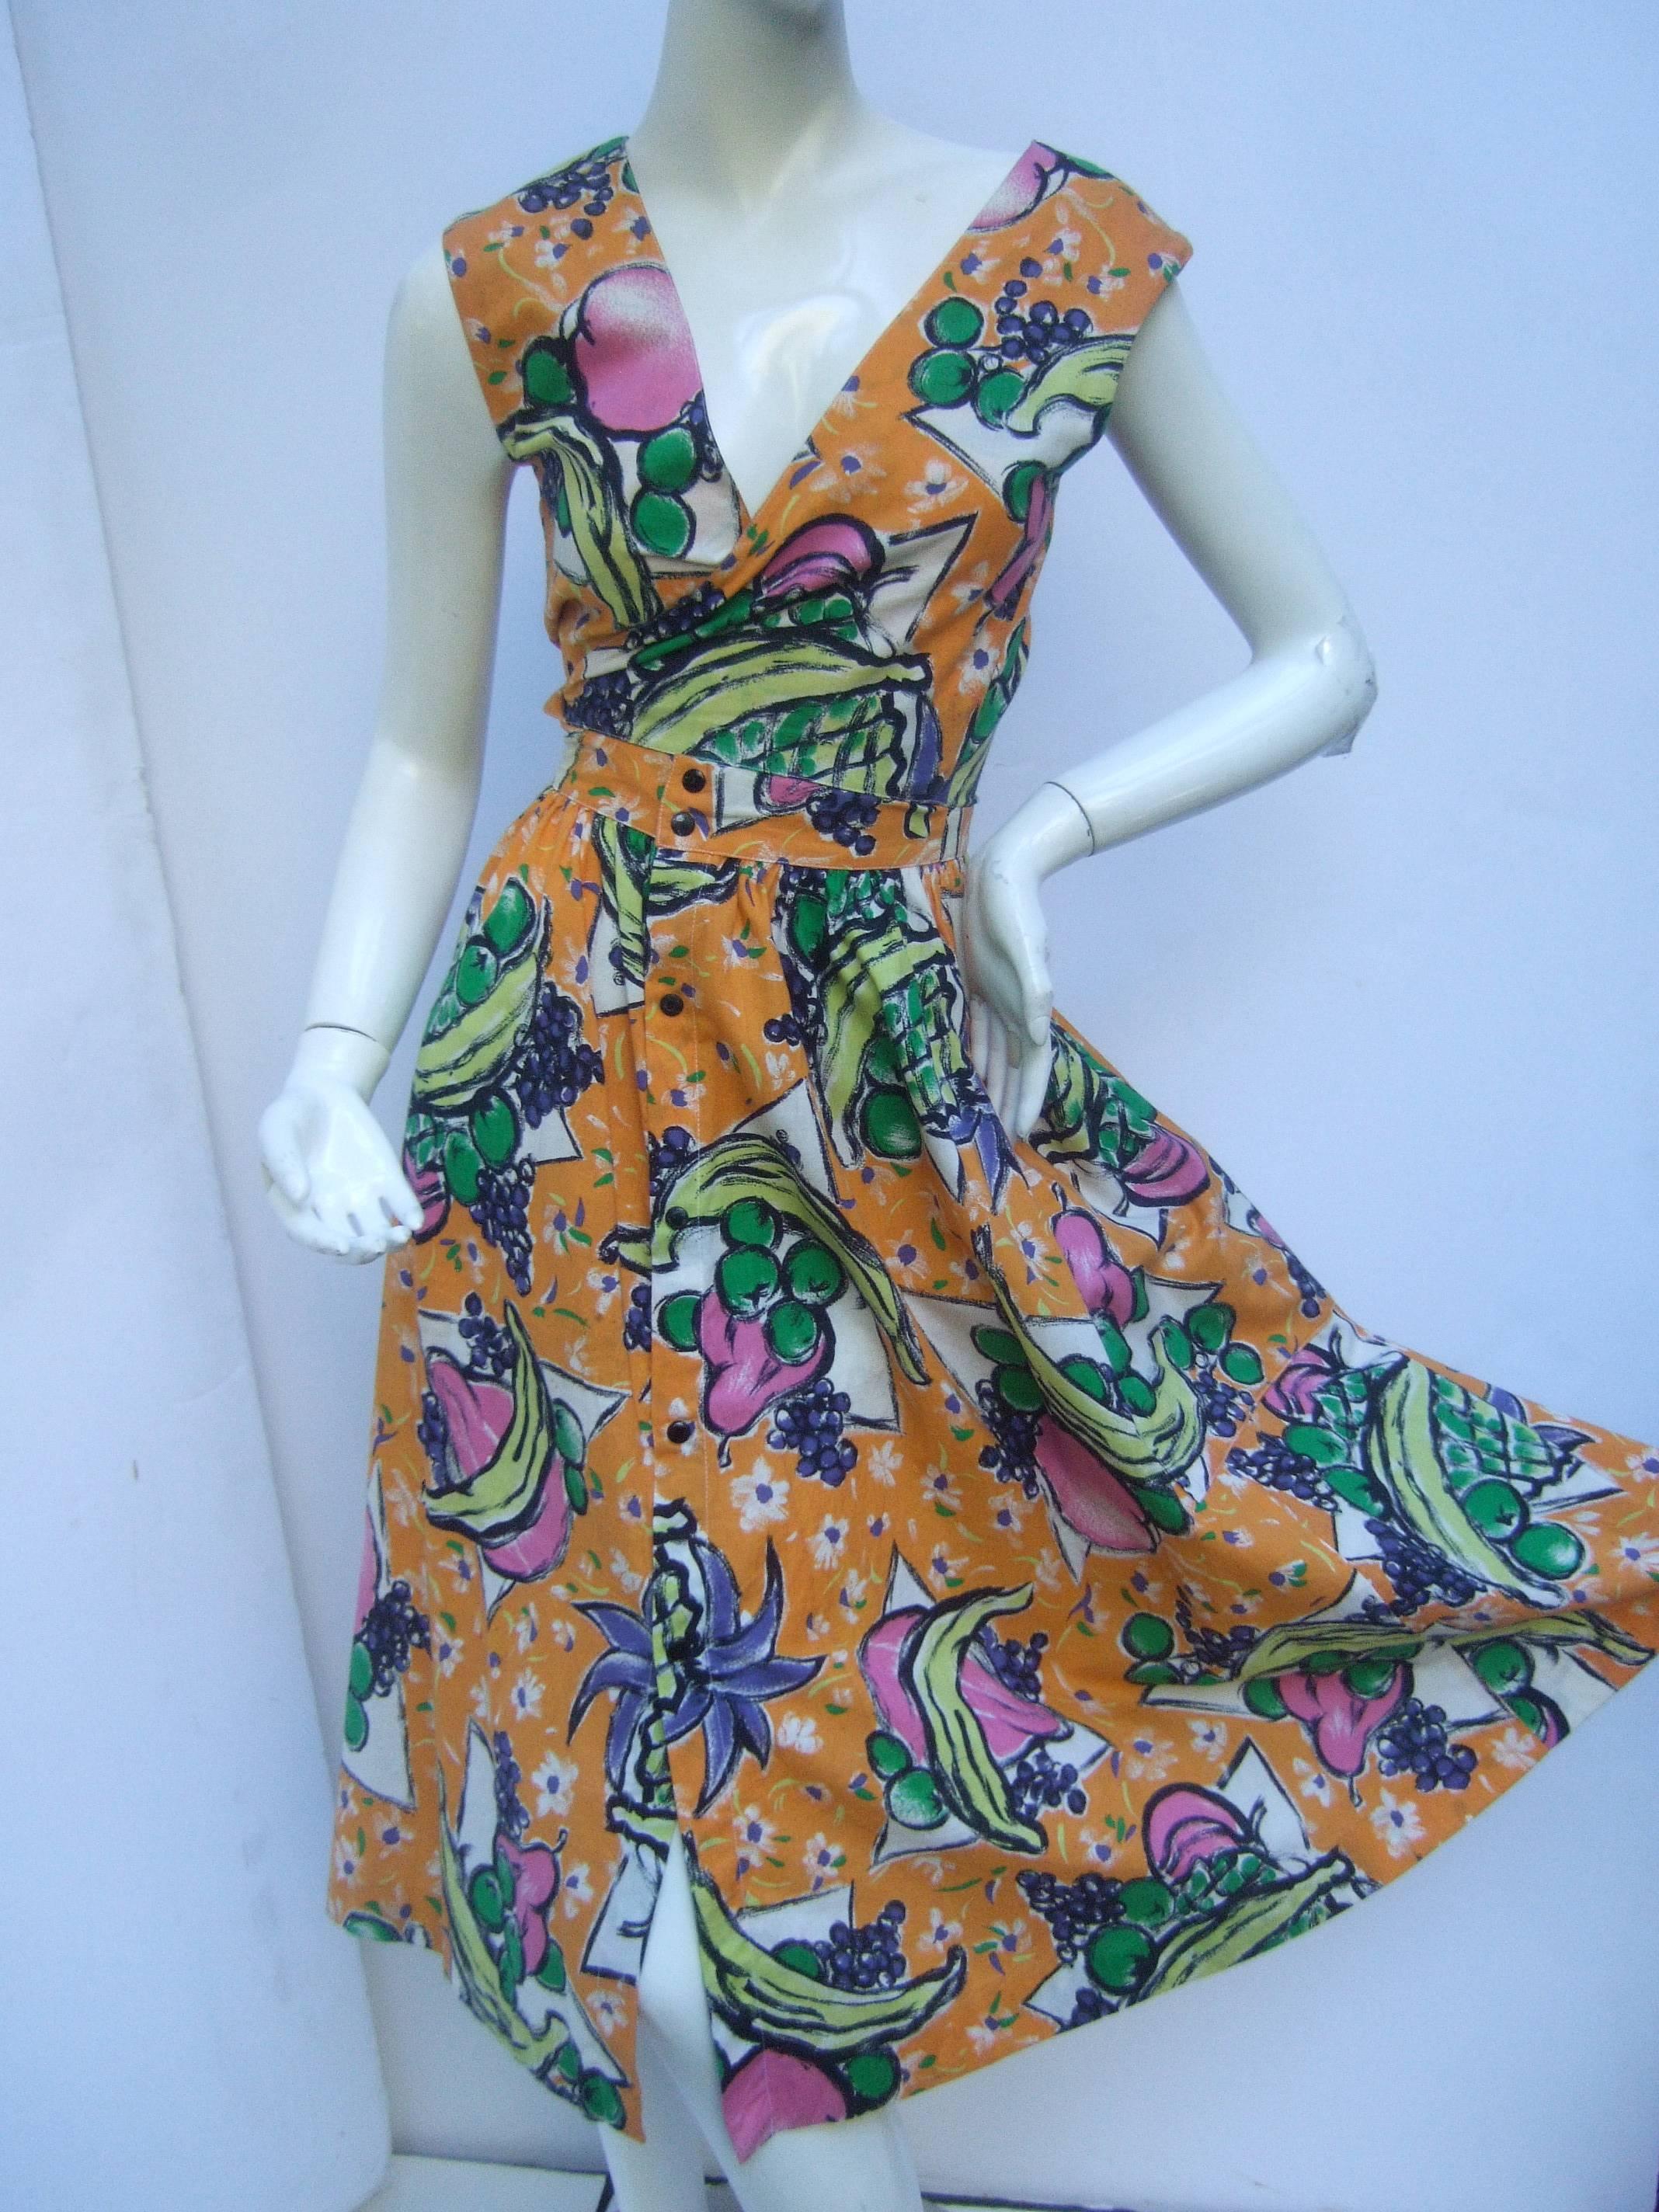 Vintage French peasant dress by Prestige de Chafflet 
The cotton print dress is illustrated with a collage 
of vibrant fruits set against a golden yellow back-
ground 

The French print dress is designed with unique
snap closures on the bodice